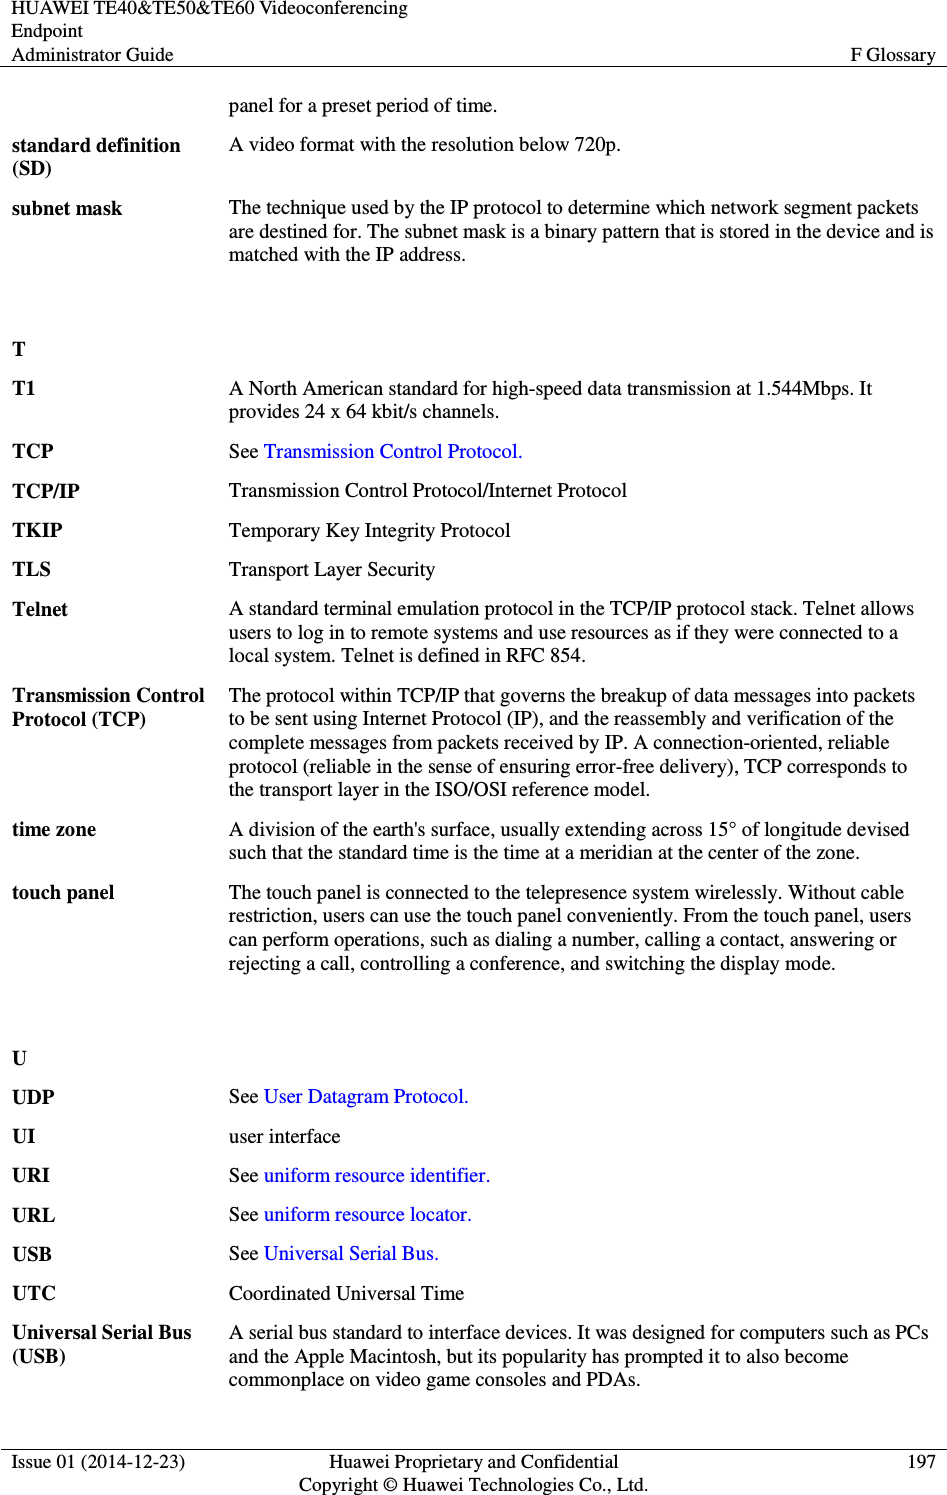 HUAWEI TE40&amp;TE50&amp;TE60 Videoconferencing Endpoint Administrator Guide  F Glossary  Issue 01 (2014-12-23)  Huawei Proprietary and Confidential                                     Copyright © Huawei Technologies Co., Ltd. 197  panel for a preset period of time. standard definition (SD) A video format with the resolution below 720p. subnet mask The technique used by the IP protocol to determine which network segment packets are destined for. The subnet mask is a binary pattern that is stored in the device and is matched with the IP address.   T  T1 A North American standard for high-speed data transmission at 1.544Mbps. It provides 24 x 64 kbit/s channels. TCP See Transmission Control Protocol. TCP/IP Transmission Control Protocol/Internet Protocol TKIP Temporary Key Integrity Protocol TLS Transport Layer Security Telnet A standard terminal emulation protocol in the TCP/IP protocol stack. Telnet allows users to log in to remote systems and use resources as if they were connected to a local system. Telnet is defined in RFC 854. Transmission Control Protocol (TCP) The protocol within TCP/IP that governs the breakup of data messages into packets to be sent using Internet Protocol (IP), and the reassembly and verification of the complete messages from packets received by IP. A connection-oriented, reliable protocol (reliable in the sense of ensuring error-free delivery), TCP corresponds to the transport layer in the ISO/OSI reference model. time zone A division of the earth&apos;s surface, usually extending across 15° of longitude devised such that the standard time is the time at a meridian at the center of the zone. touch panel The touch panel is connected to the telepresence system wirelessly. Without cable restriction, users can use the touch panel conveniently. From the touch panel, users can perform operations, such as dialing a number, calling a contact, answering or rejecting a call, controlling a conference, and switching the display mode.   U  UDP See User Datagram Protocol. UI user interface URI See uniform resource identifier. URL See uniform resource locator. USB See Universal Serial Bus. UTC Coordinated Universal Time Universal Serial Bus (USB) A serial bus standard to interface devices. It was designed for computers such as PCs and the Apple Macintosh, but its popularity has prompted it to also become commonplace on video game consoles and PDAs. 